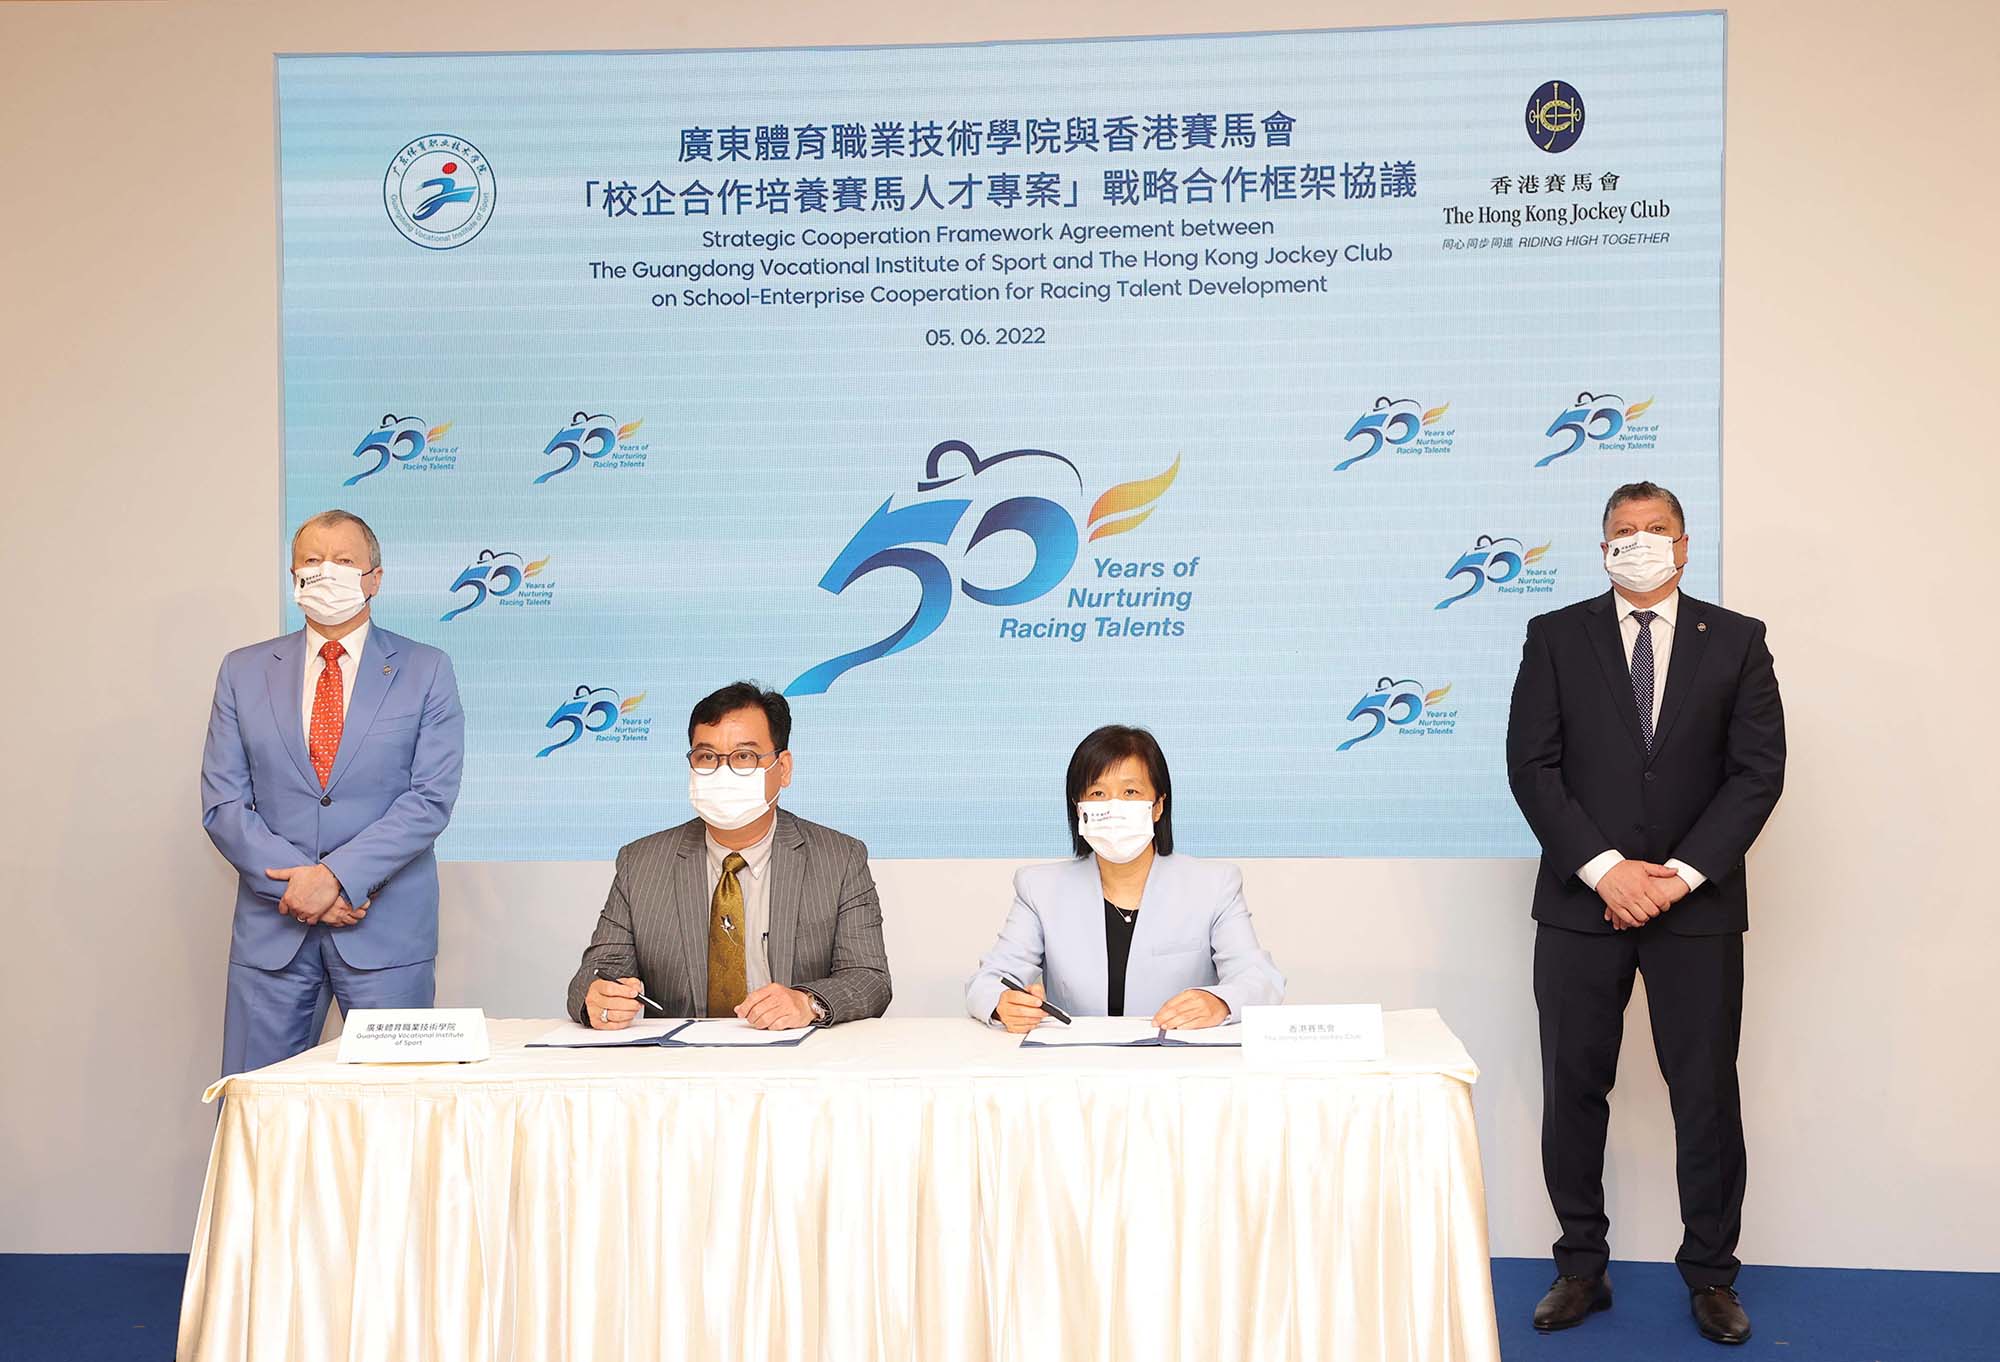 In the presence of Club Chief Executive Officer Winfried Engelbrecht-Bresges (back row, left) and Club Director of Racing Product, Marketing and Sponsorship William Nader (back row, right), Club’s Racing Talent Training Centre Executive Manager and Headmistress of Apprentice Jockeys’ School Amy Chan (front row, right) signs the Strategic Cooperation Framework Agreement on Social-Enterprise Cooperation for Racing Talent Development with Guangdong Vocational Institute of Sports Visiting Professor Prof. Chan Leung-bo (front row, left).